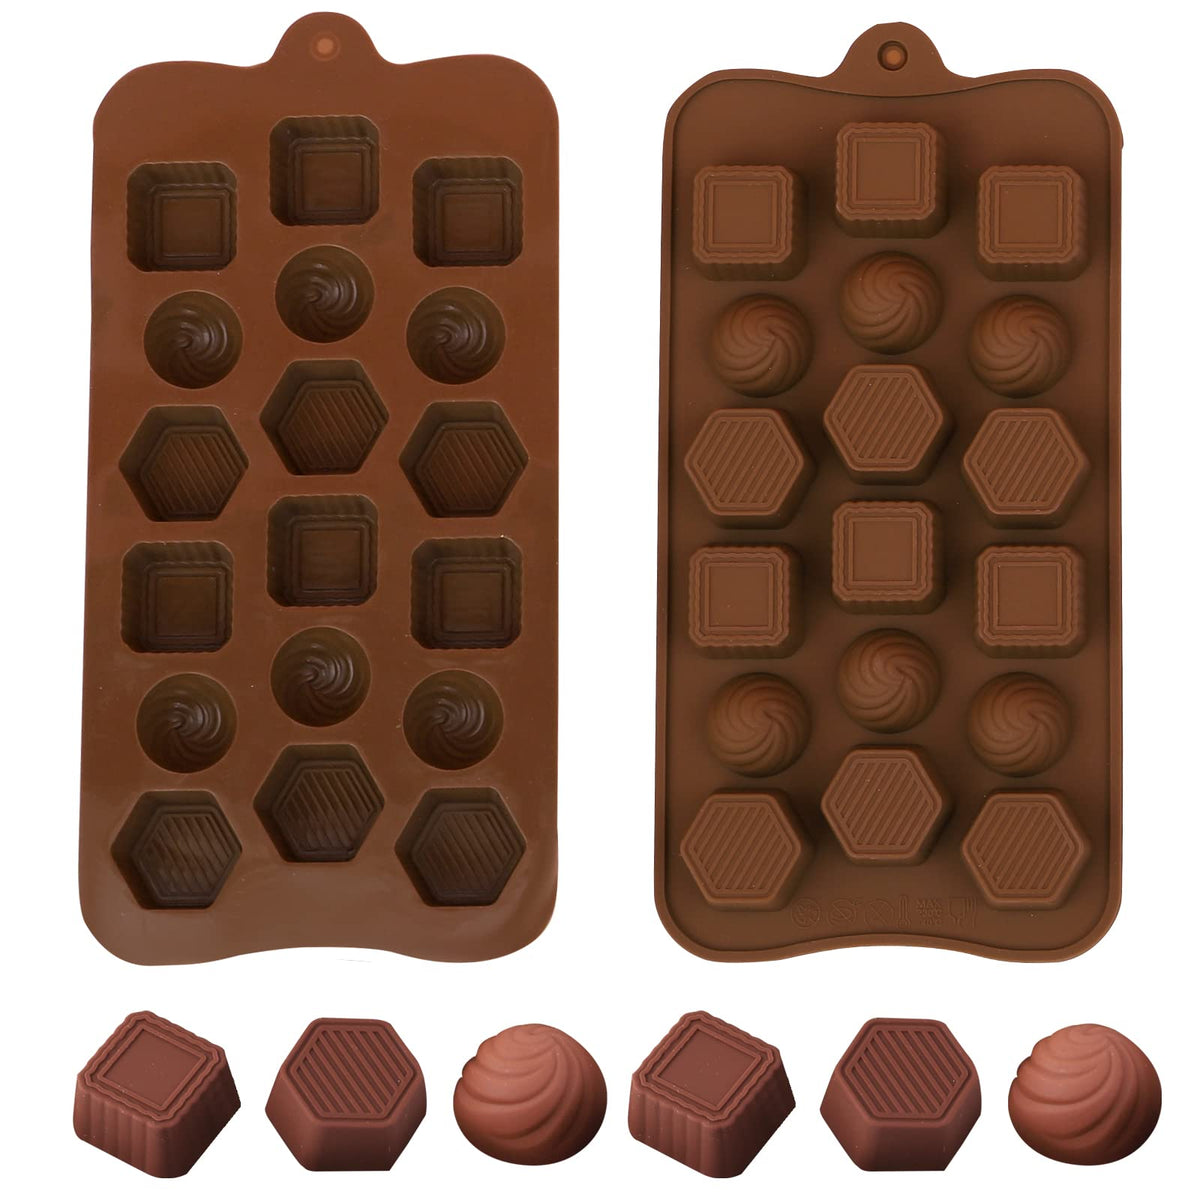 JOERSH Chocolate Silicon Molds Set of 5 Different